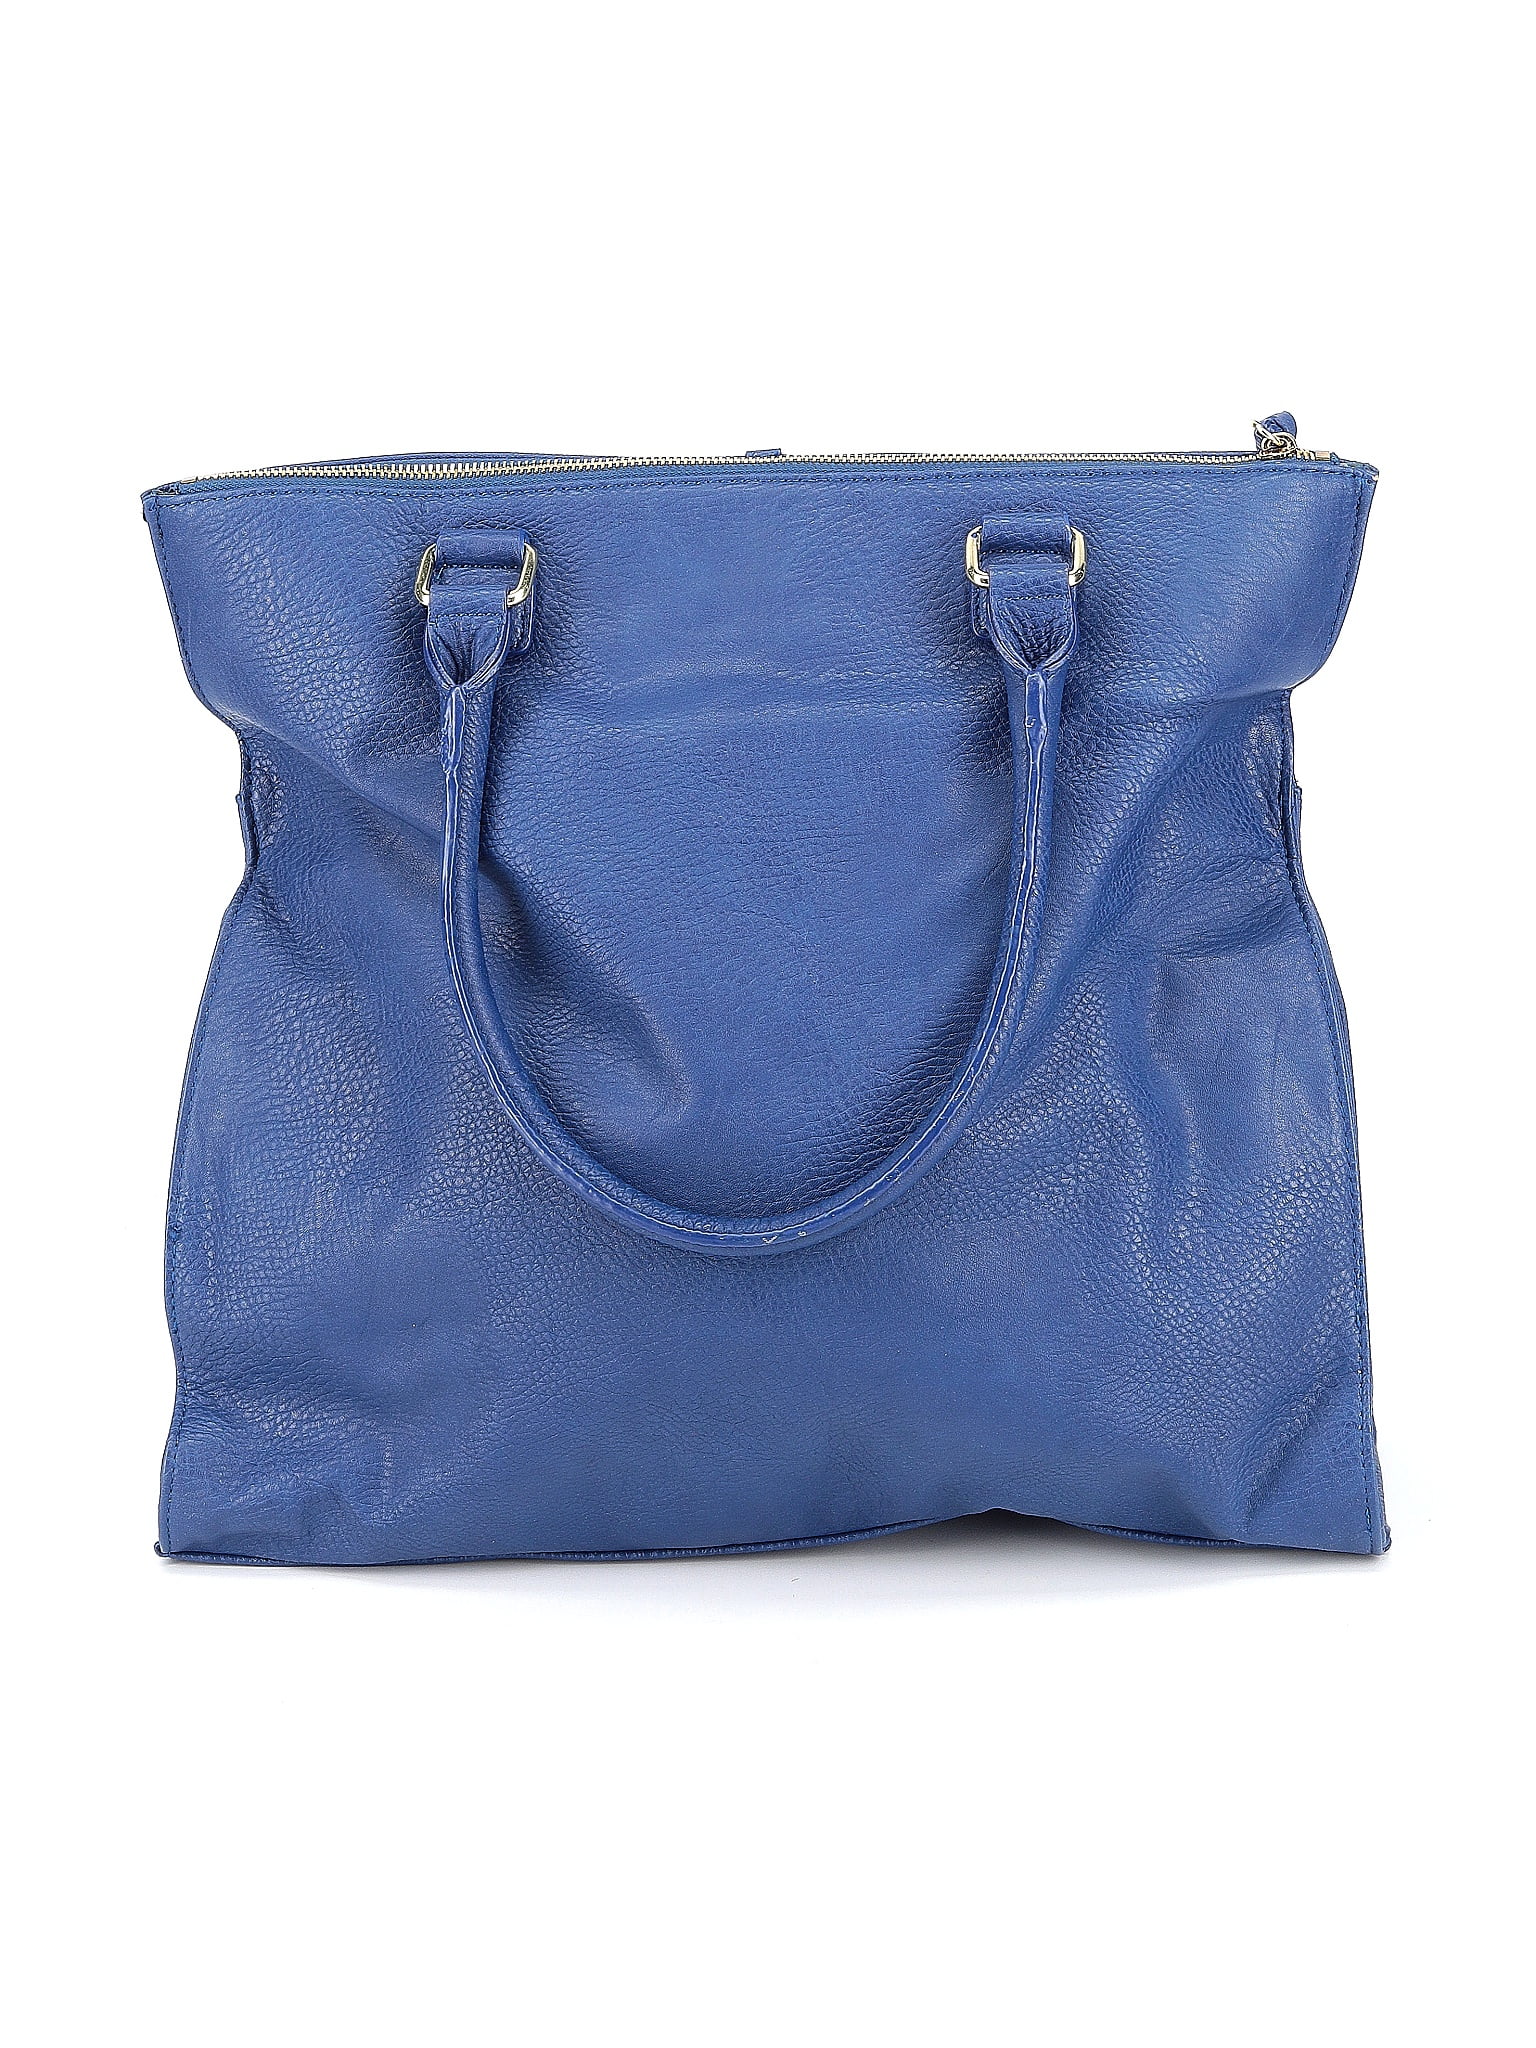 Olivia + Joy Solid Blue Tote One Size - 66% off